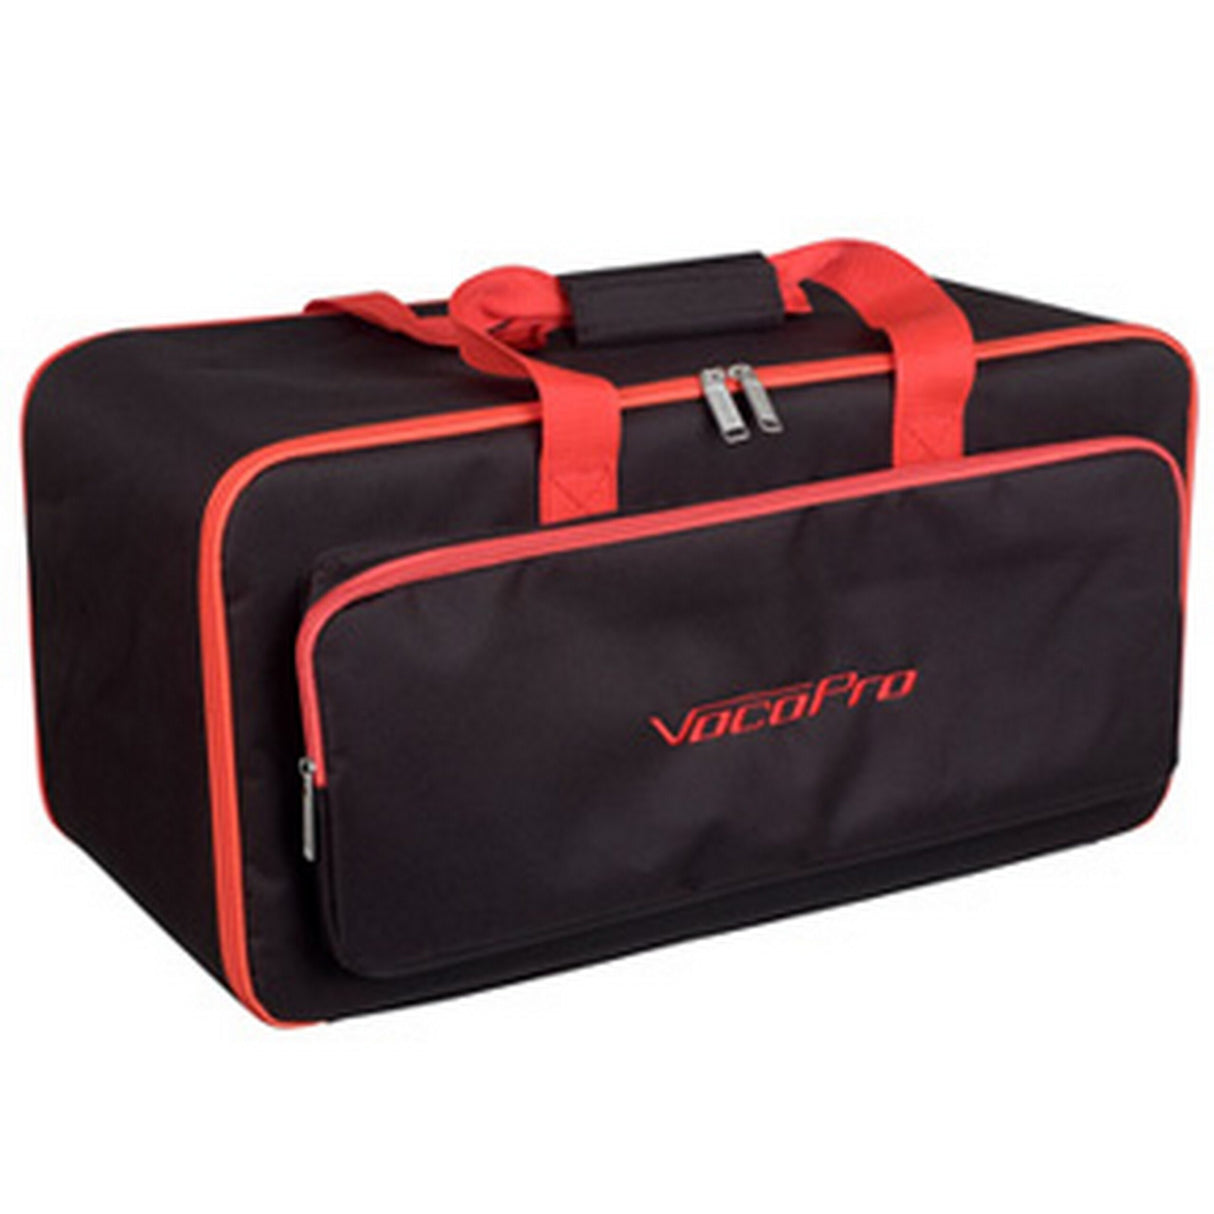 VocoPro BAG-28 Wireless Microphone Bag for 2 Receivers and 8 Bodypack / Handheld Transmitters